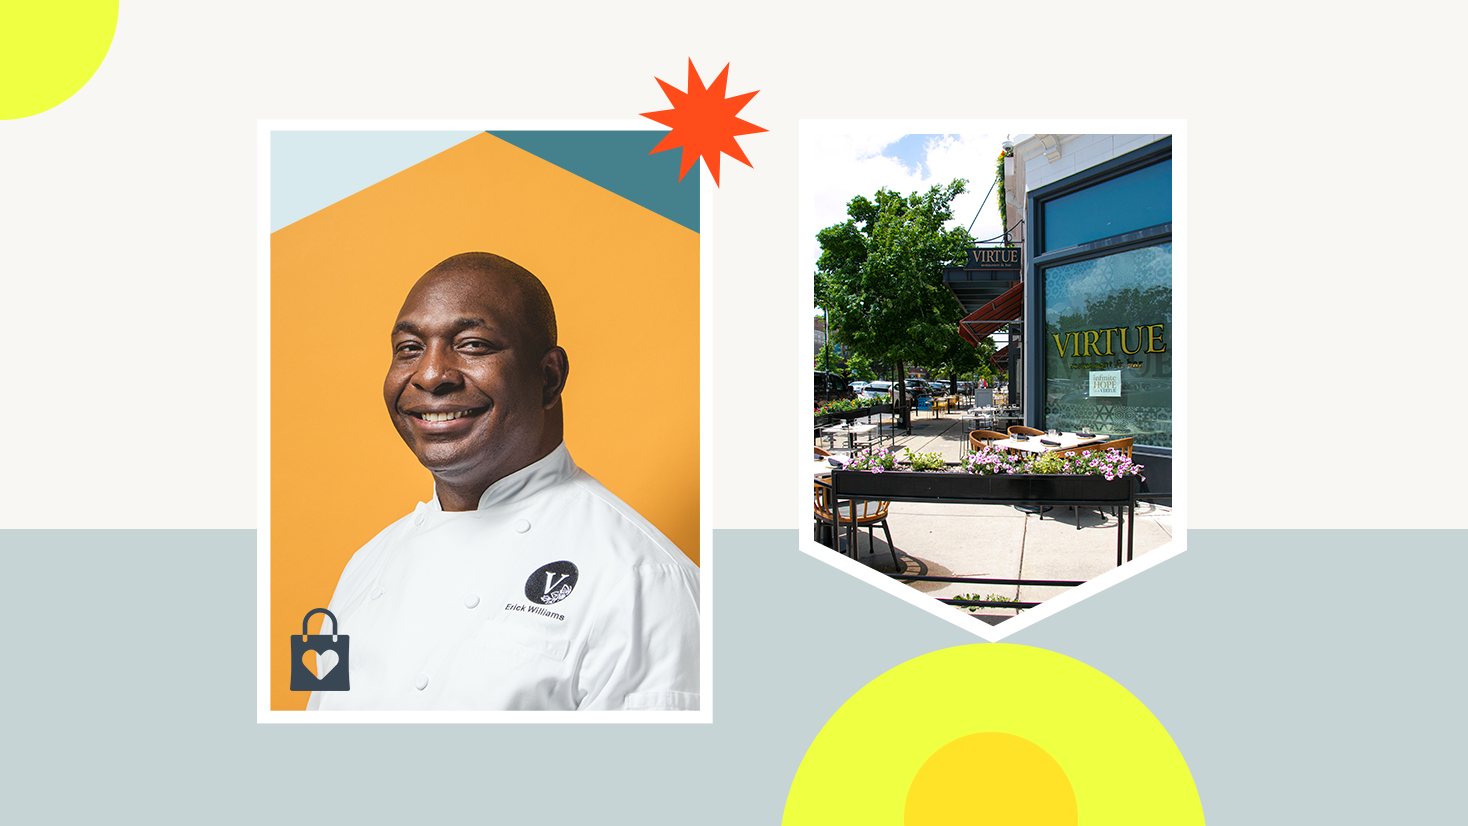 Chef Erick Williams; the outside of Virtue restaurant